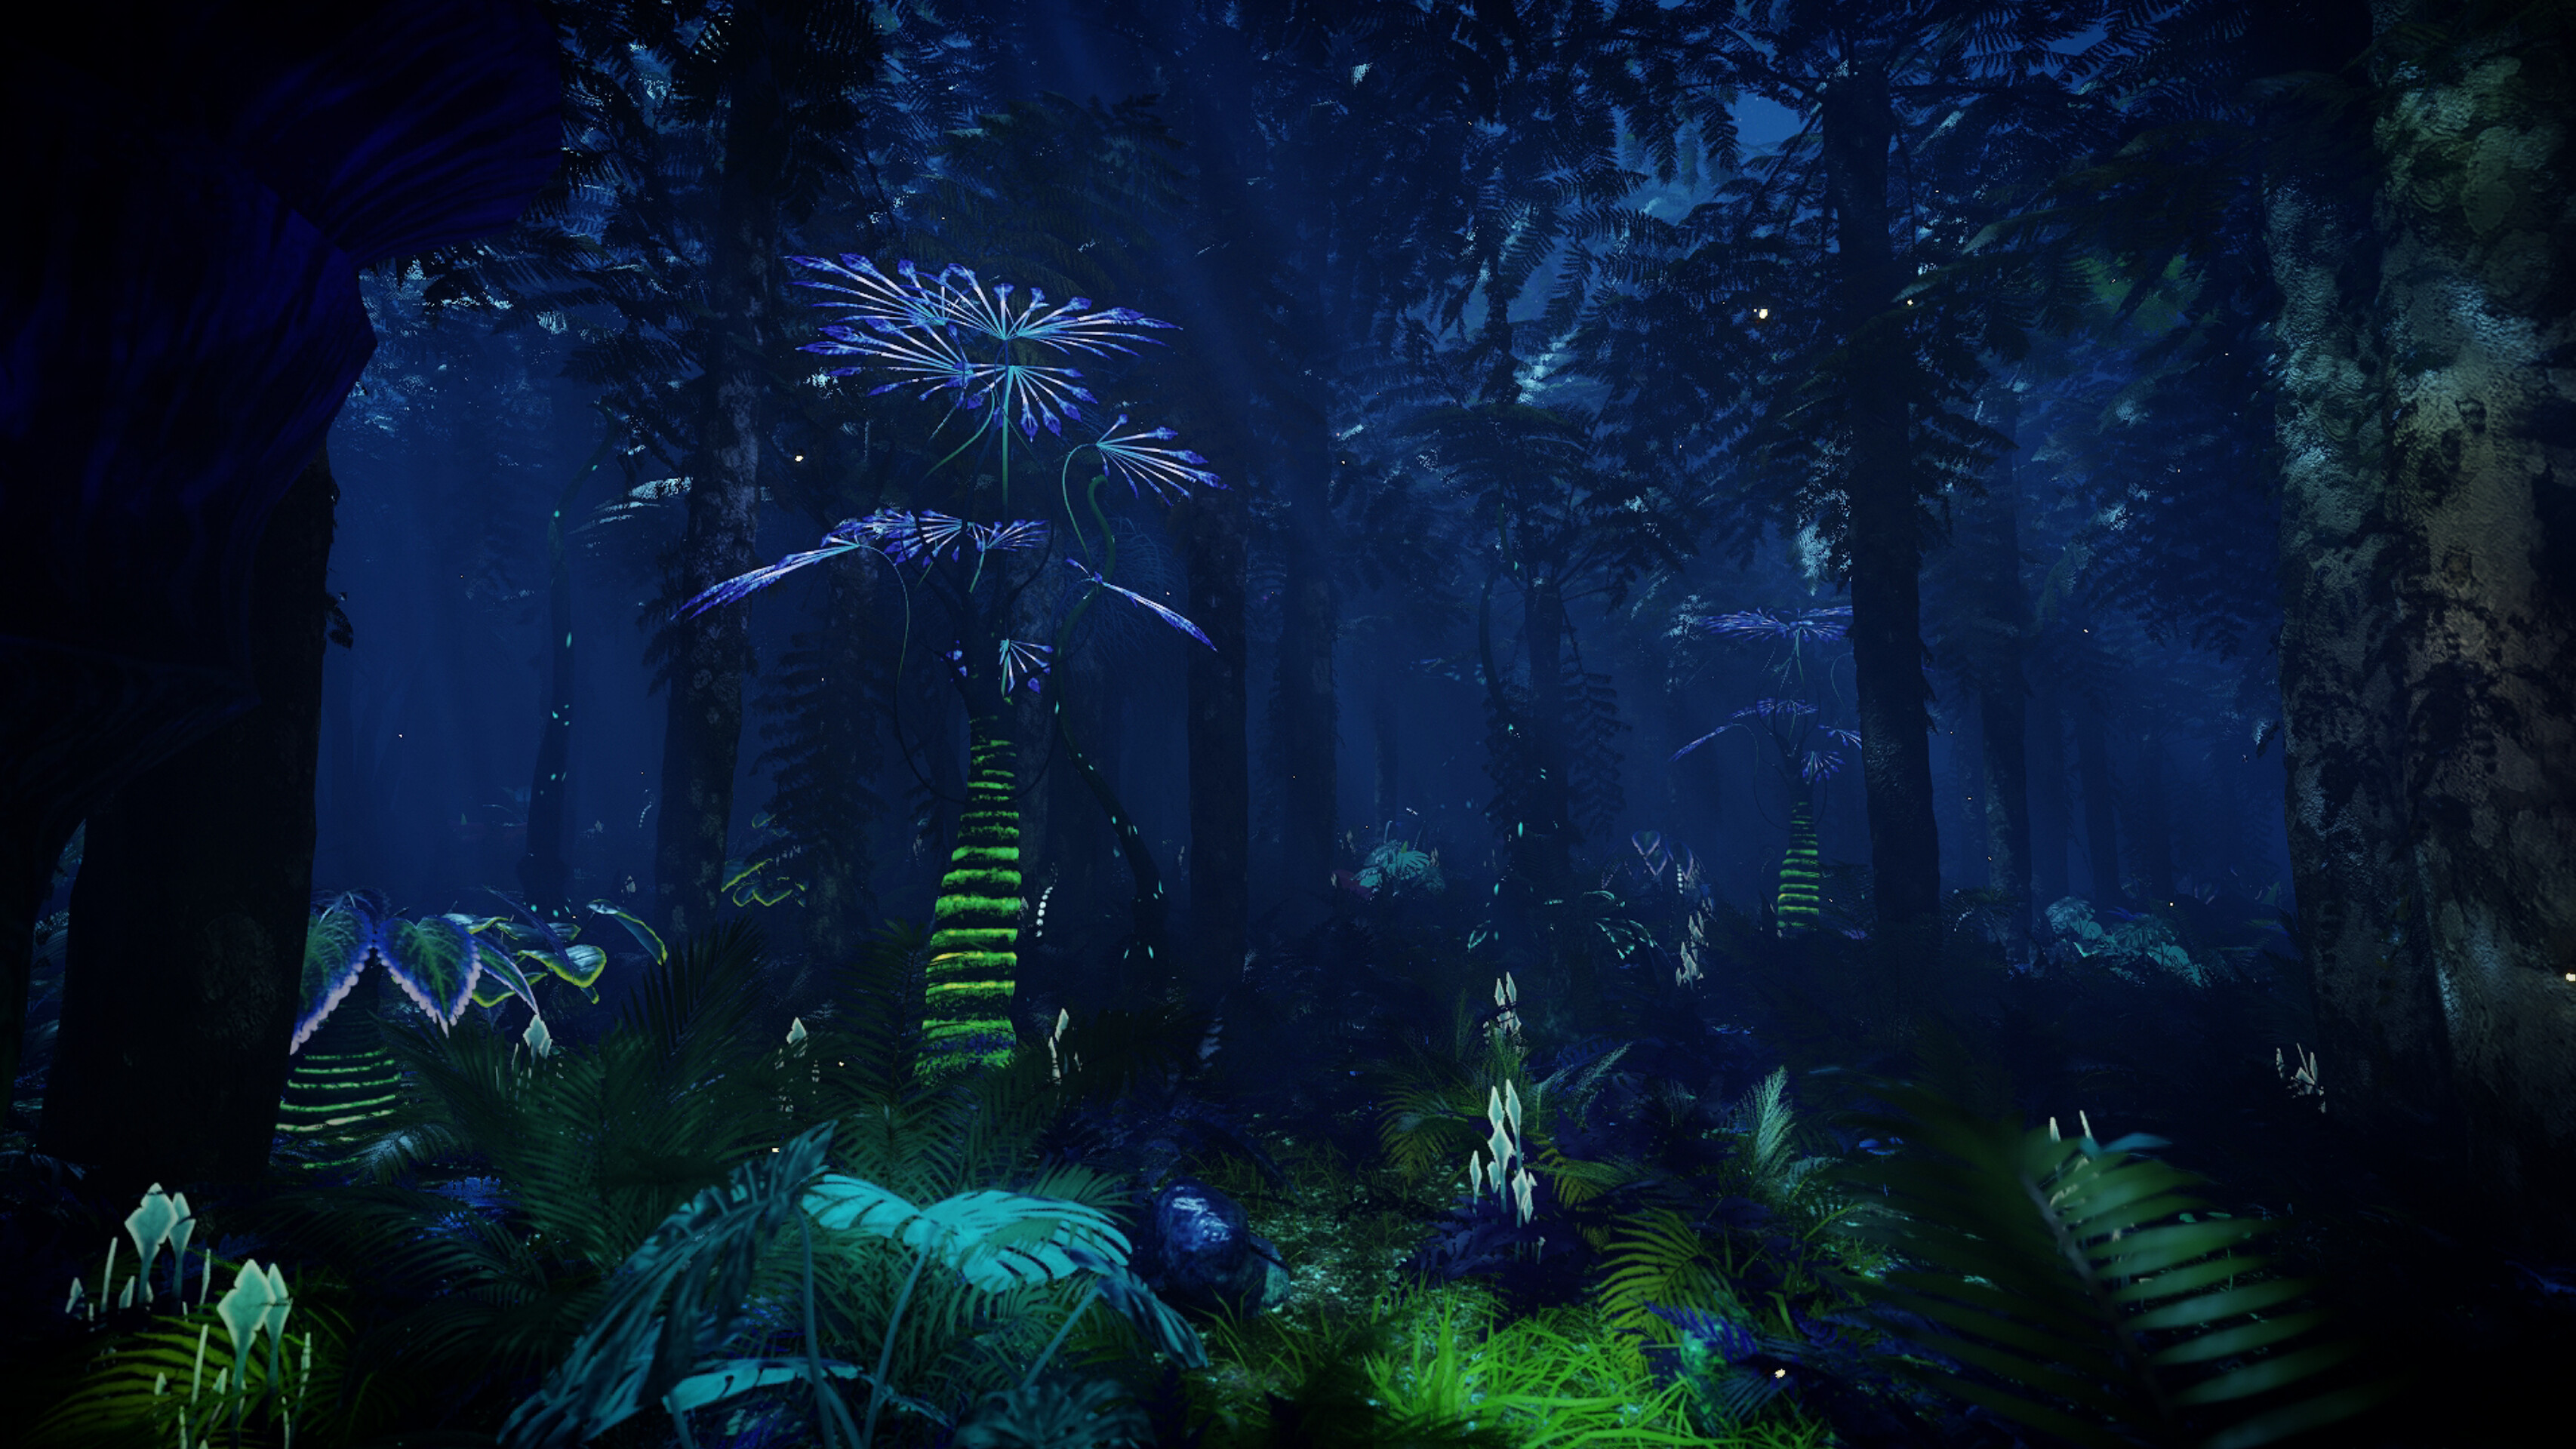 Alien Forest or Jungle Used Eevee Render Inspired From Pandoras Moon in  Avatar 2009 Movie  Focused Critiques  Blender Artists Community